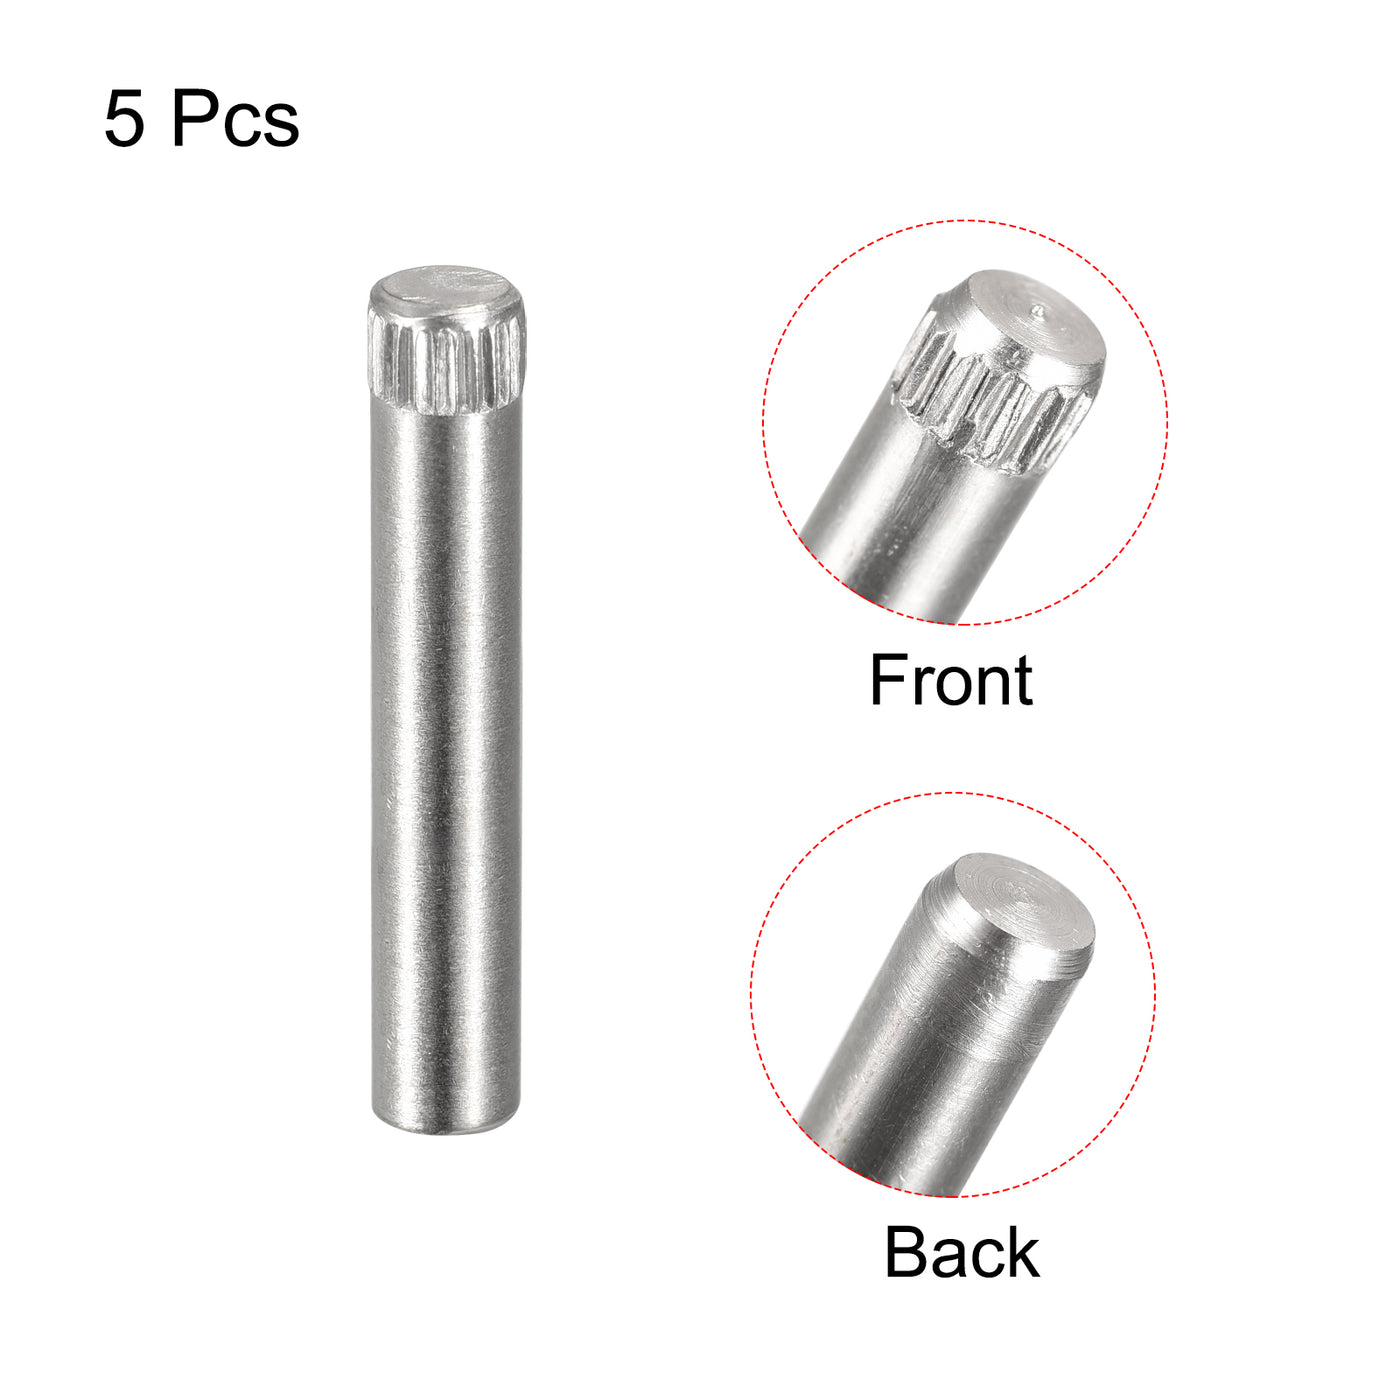 uxcell Uxcell 6x35mm 304 Stainless Steel Dowel Pins, 5Pcs Knurled Head Flat End Dowel Pin